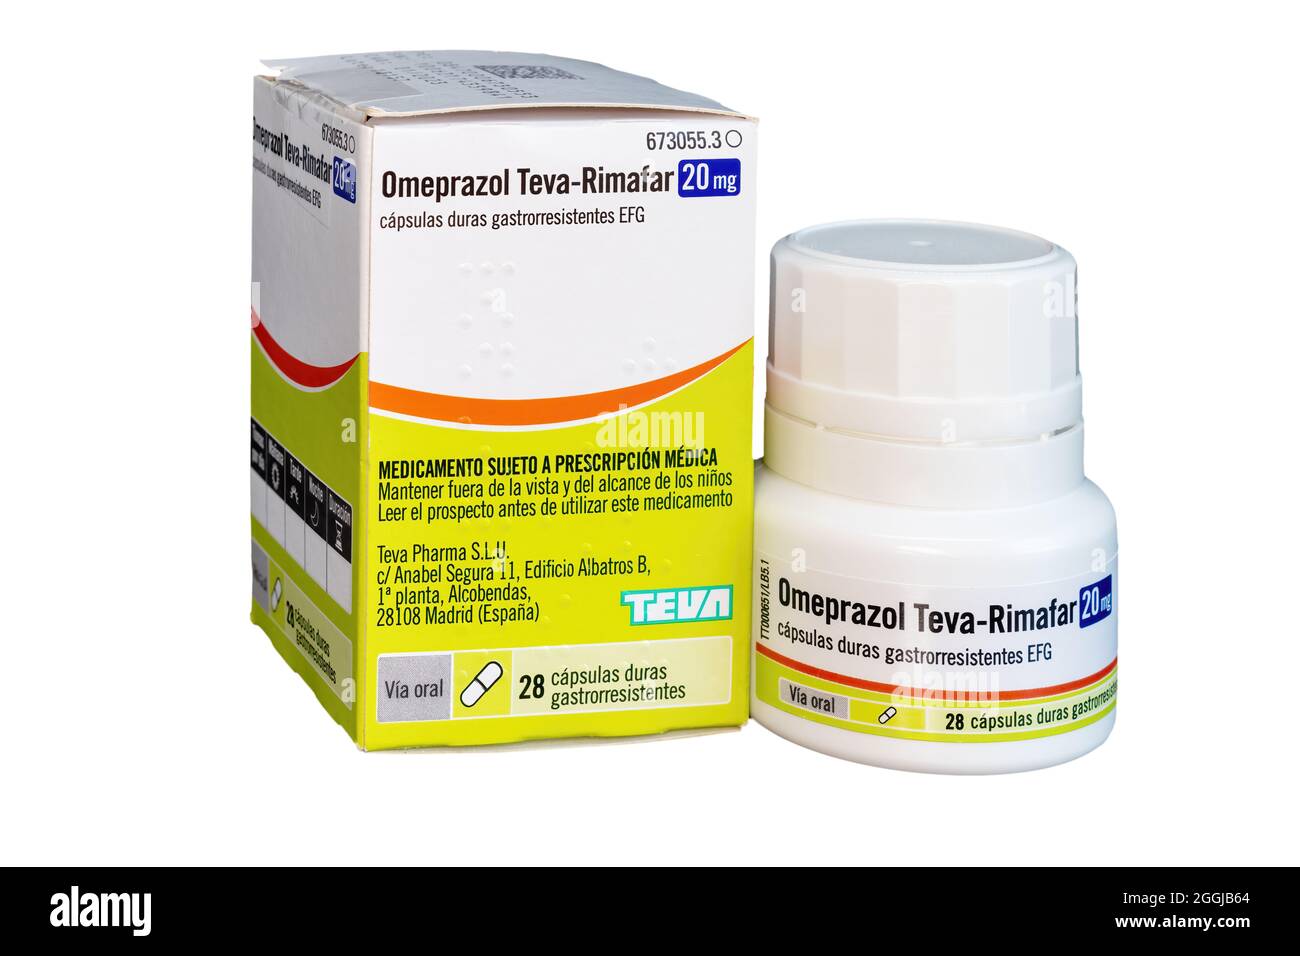 Huelva, Spain - August 27, 2021: Spanish bottle of generic Omeprazole from Teva-Rimafar laboratory. It is used to treat stomach and esophagus problems Stock Photo